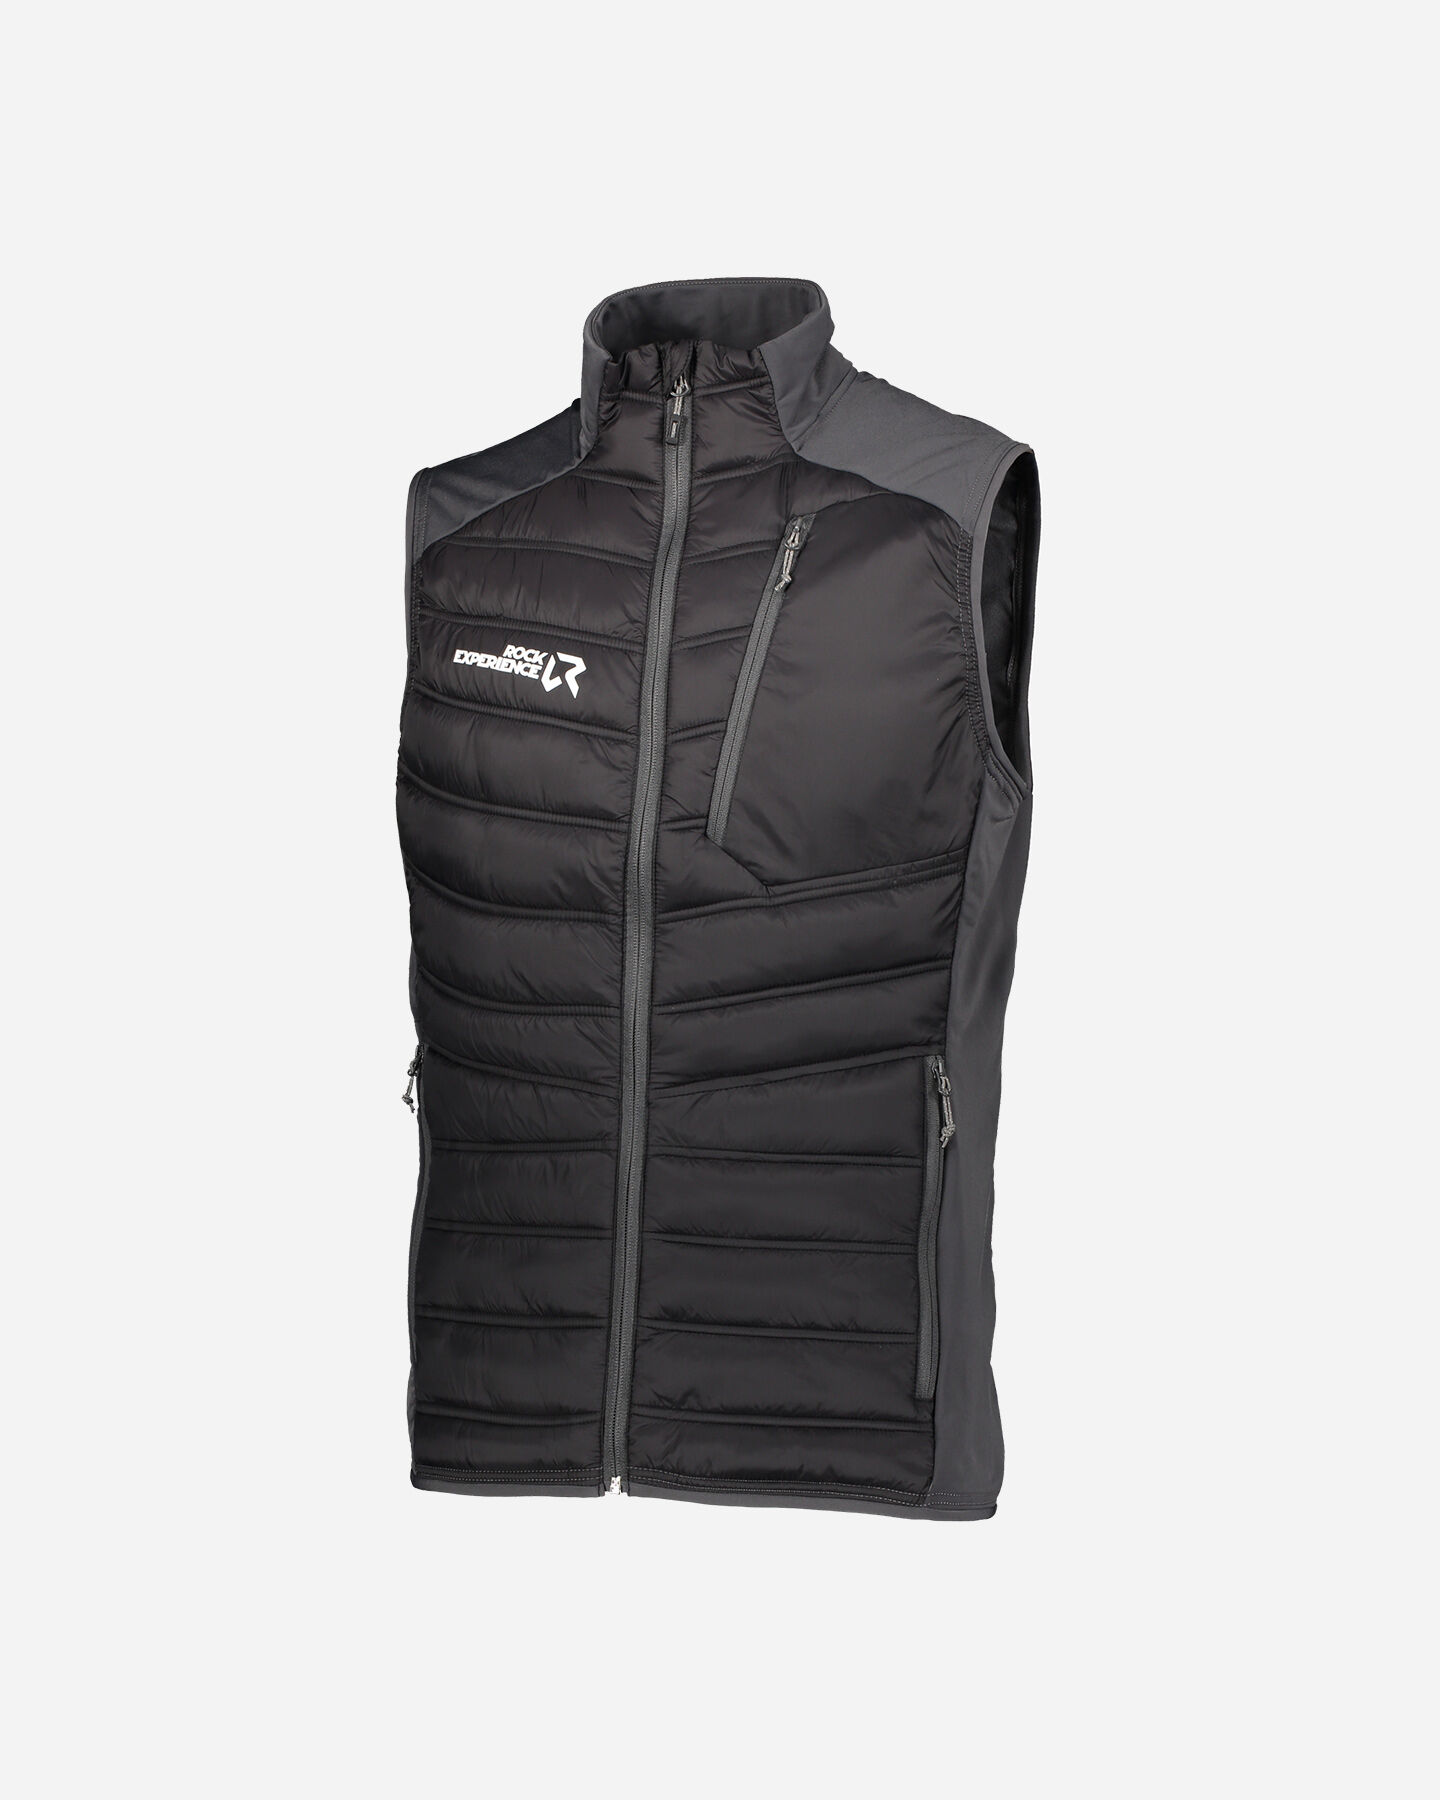  Gilet ROCK EXPERIENCE PARKER HYB  M S4077673|C289|S scatto 0